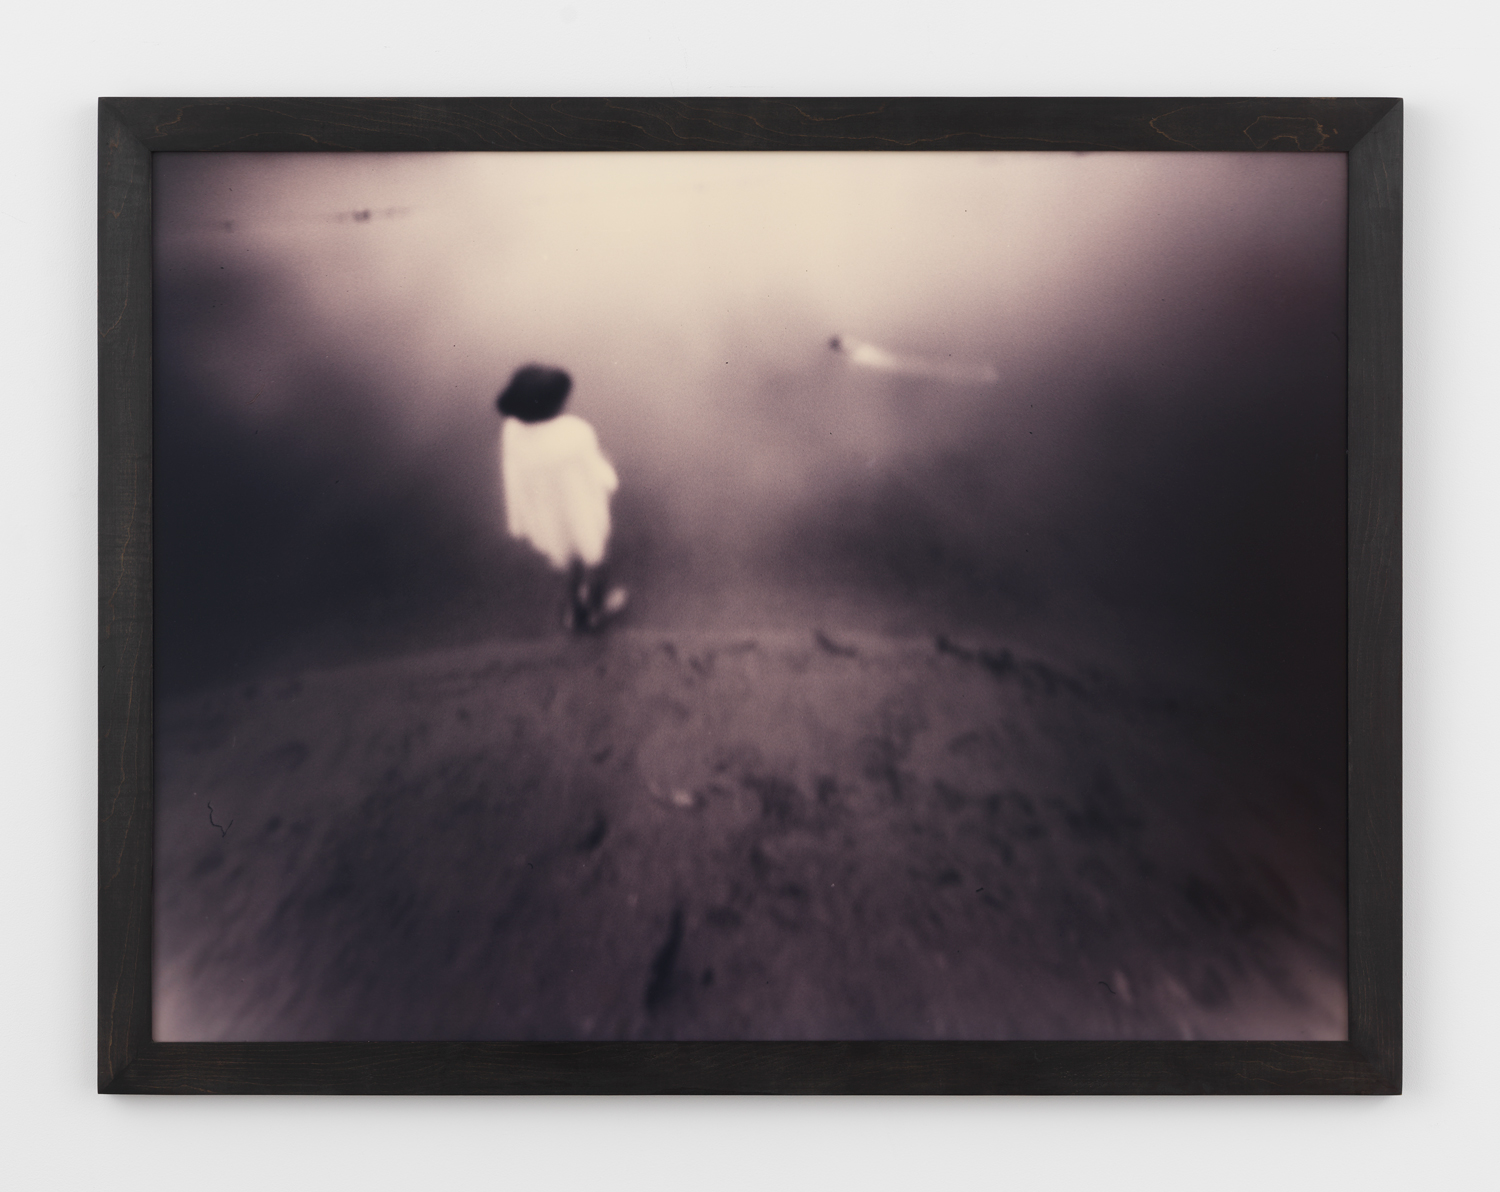 Barbara Ess, Untitled (“Food for the Moon” series), 1986, C-print photograph mounted on board and laminated, 30w x 40h in.